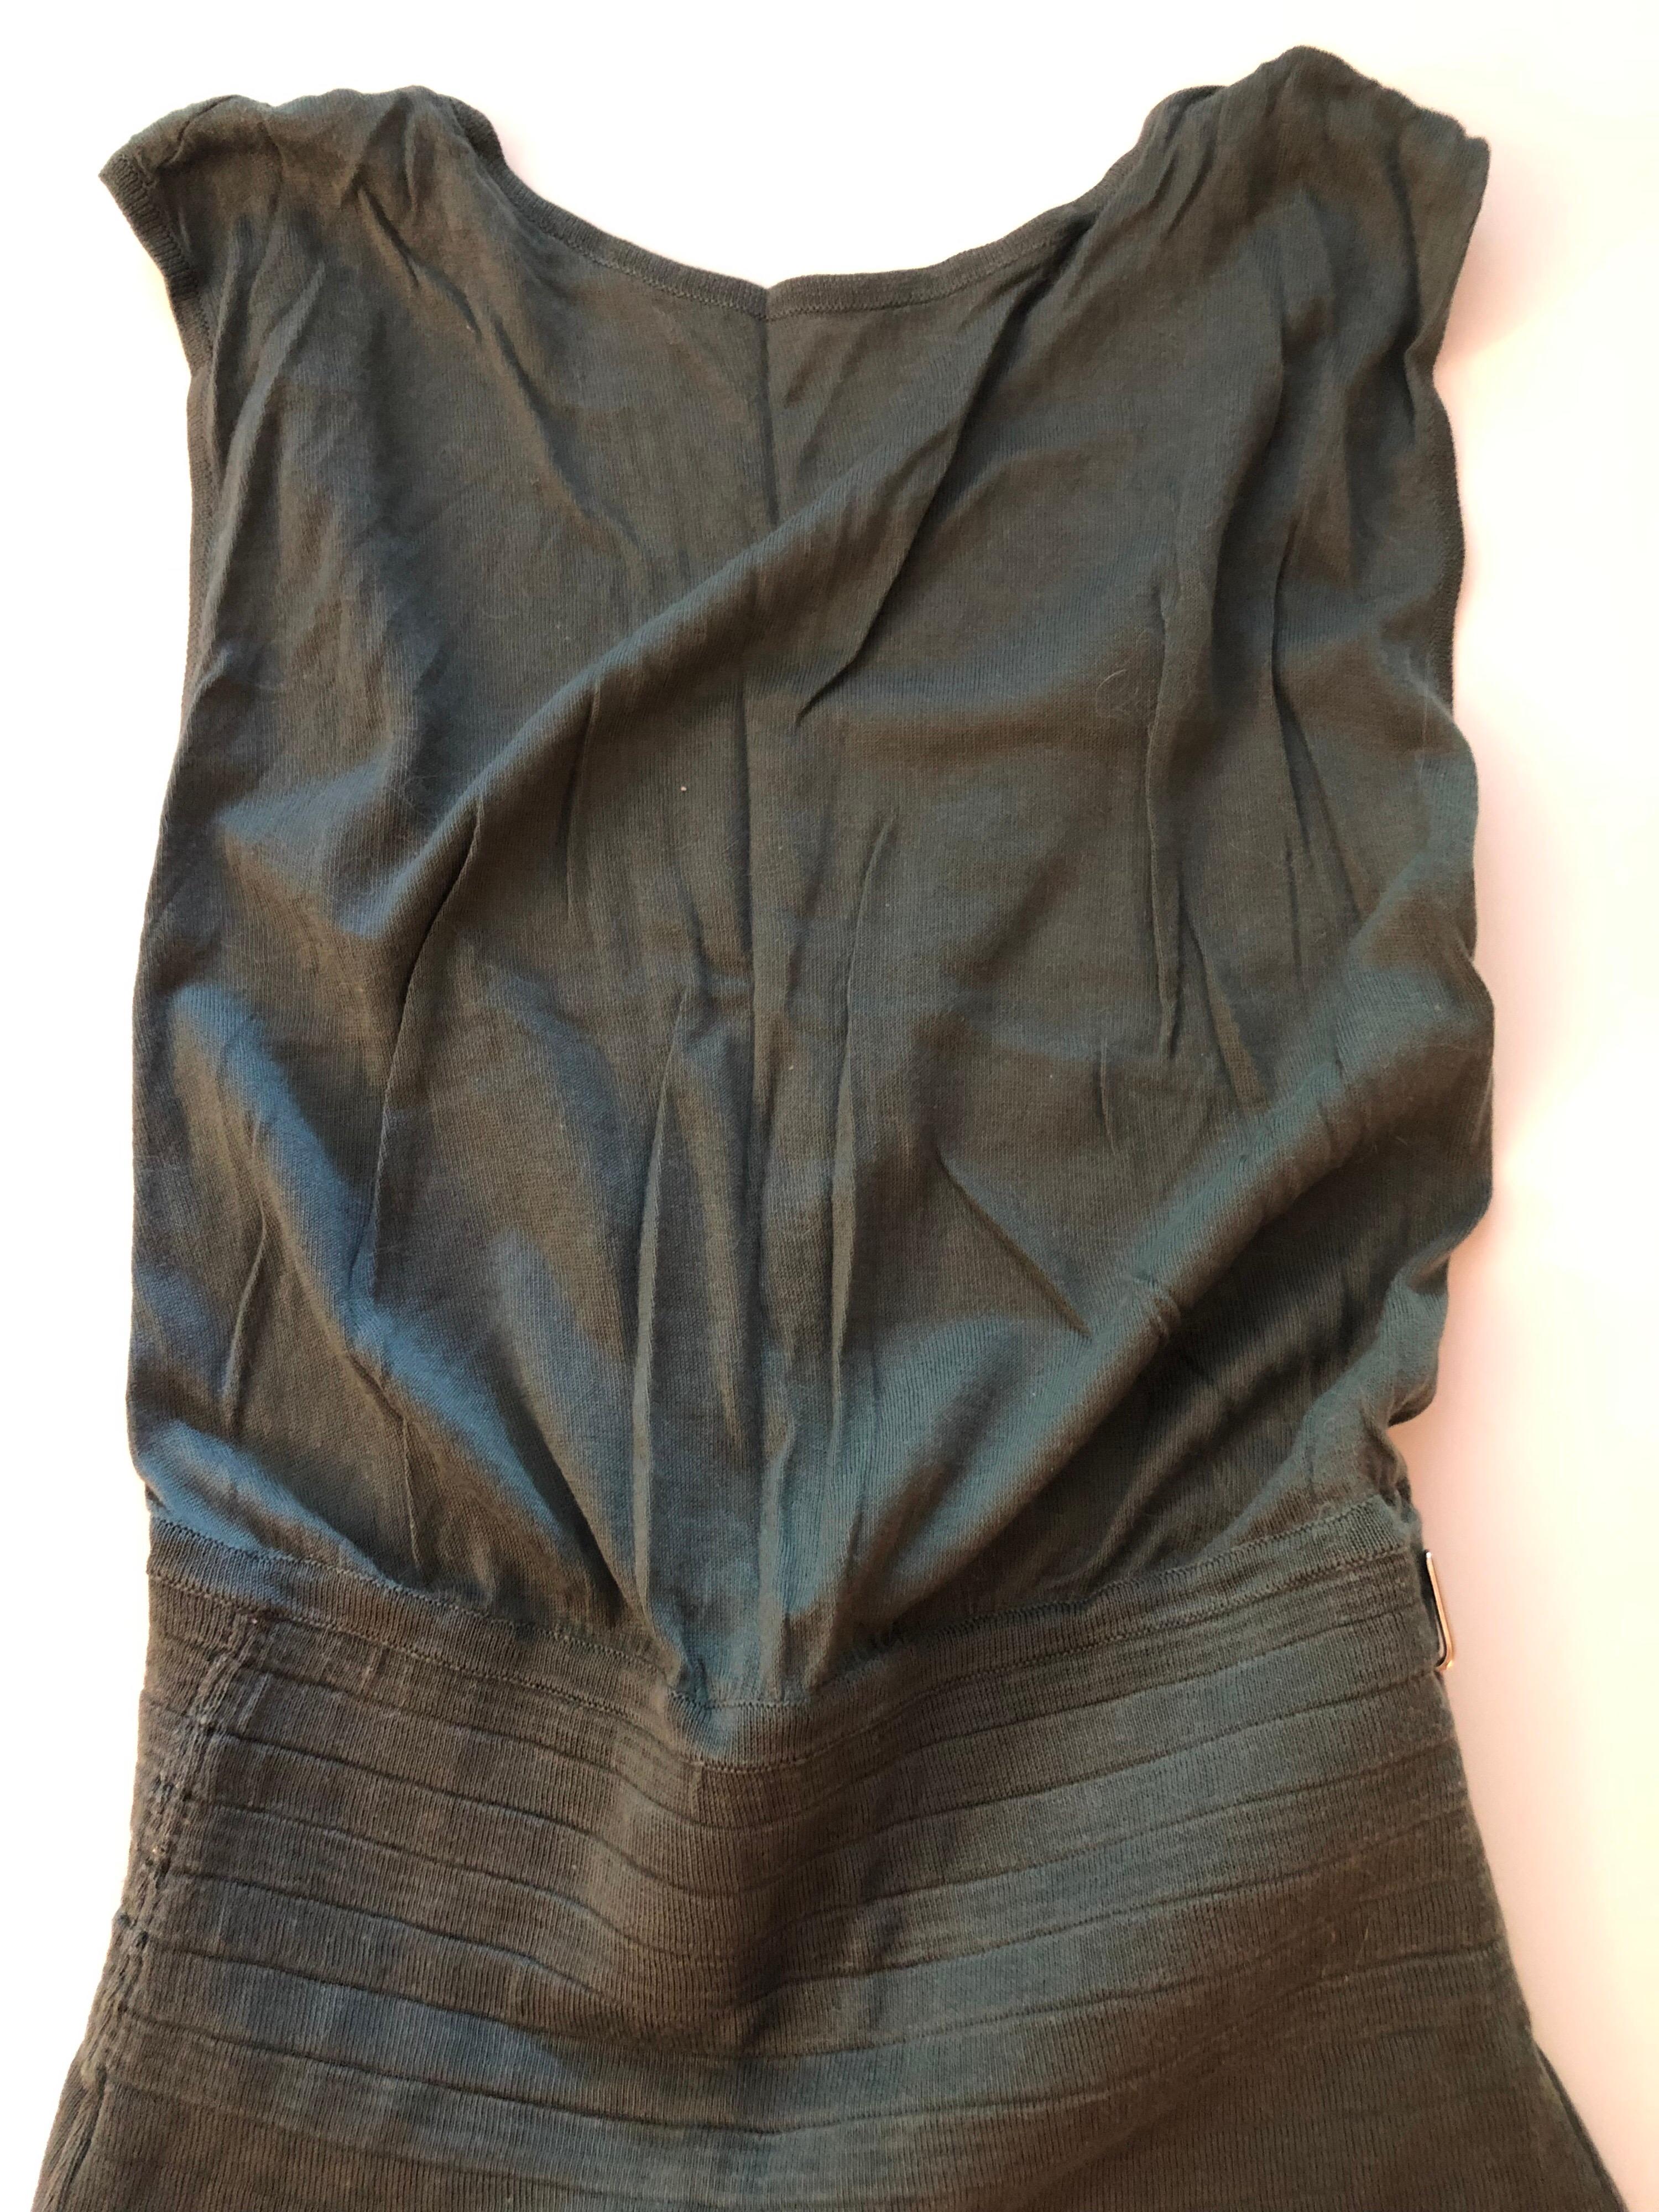 Jade Alaïa sleeveless bodysuit with scoop neck, knit detailing throughout, cutout at back and snap closures at bottom. Size not listed, estimated from measurements.

All Eyes on Alaïa

For the last half-century, the world’s most fashionable and